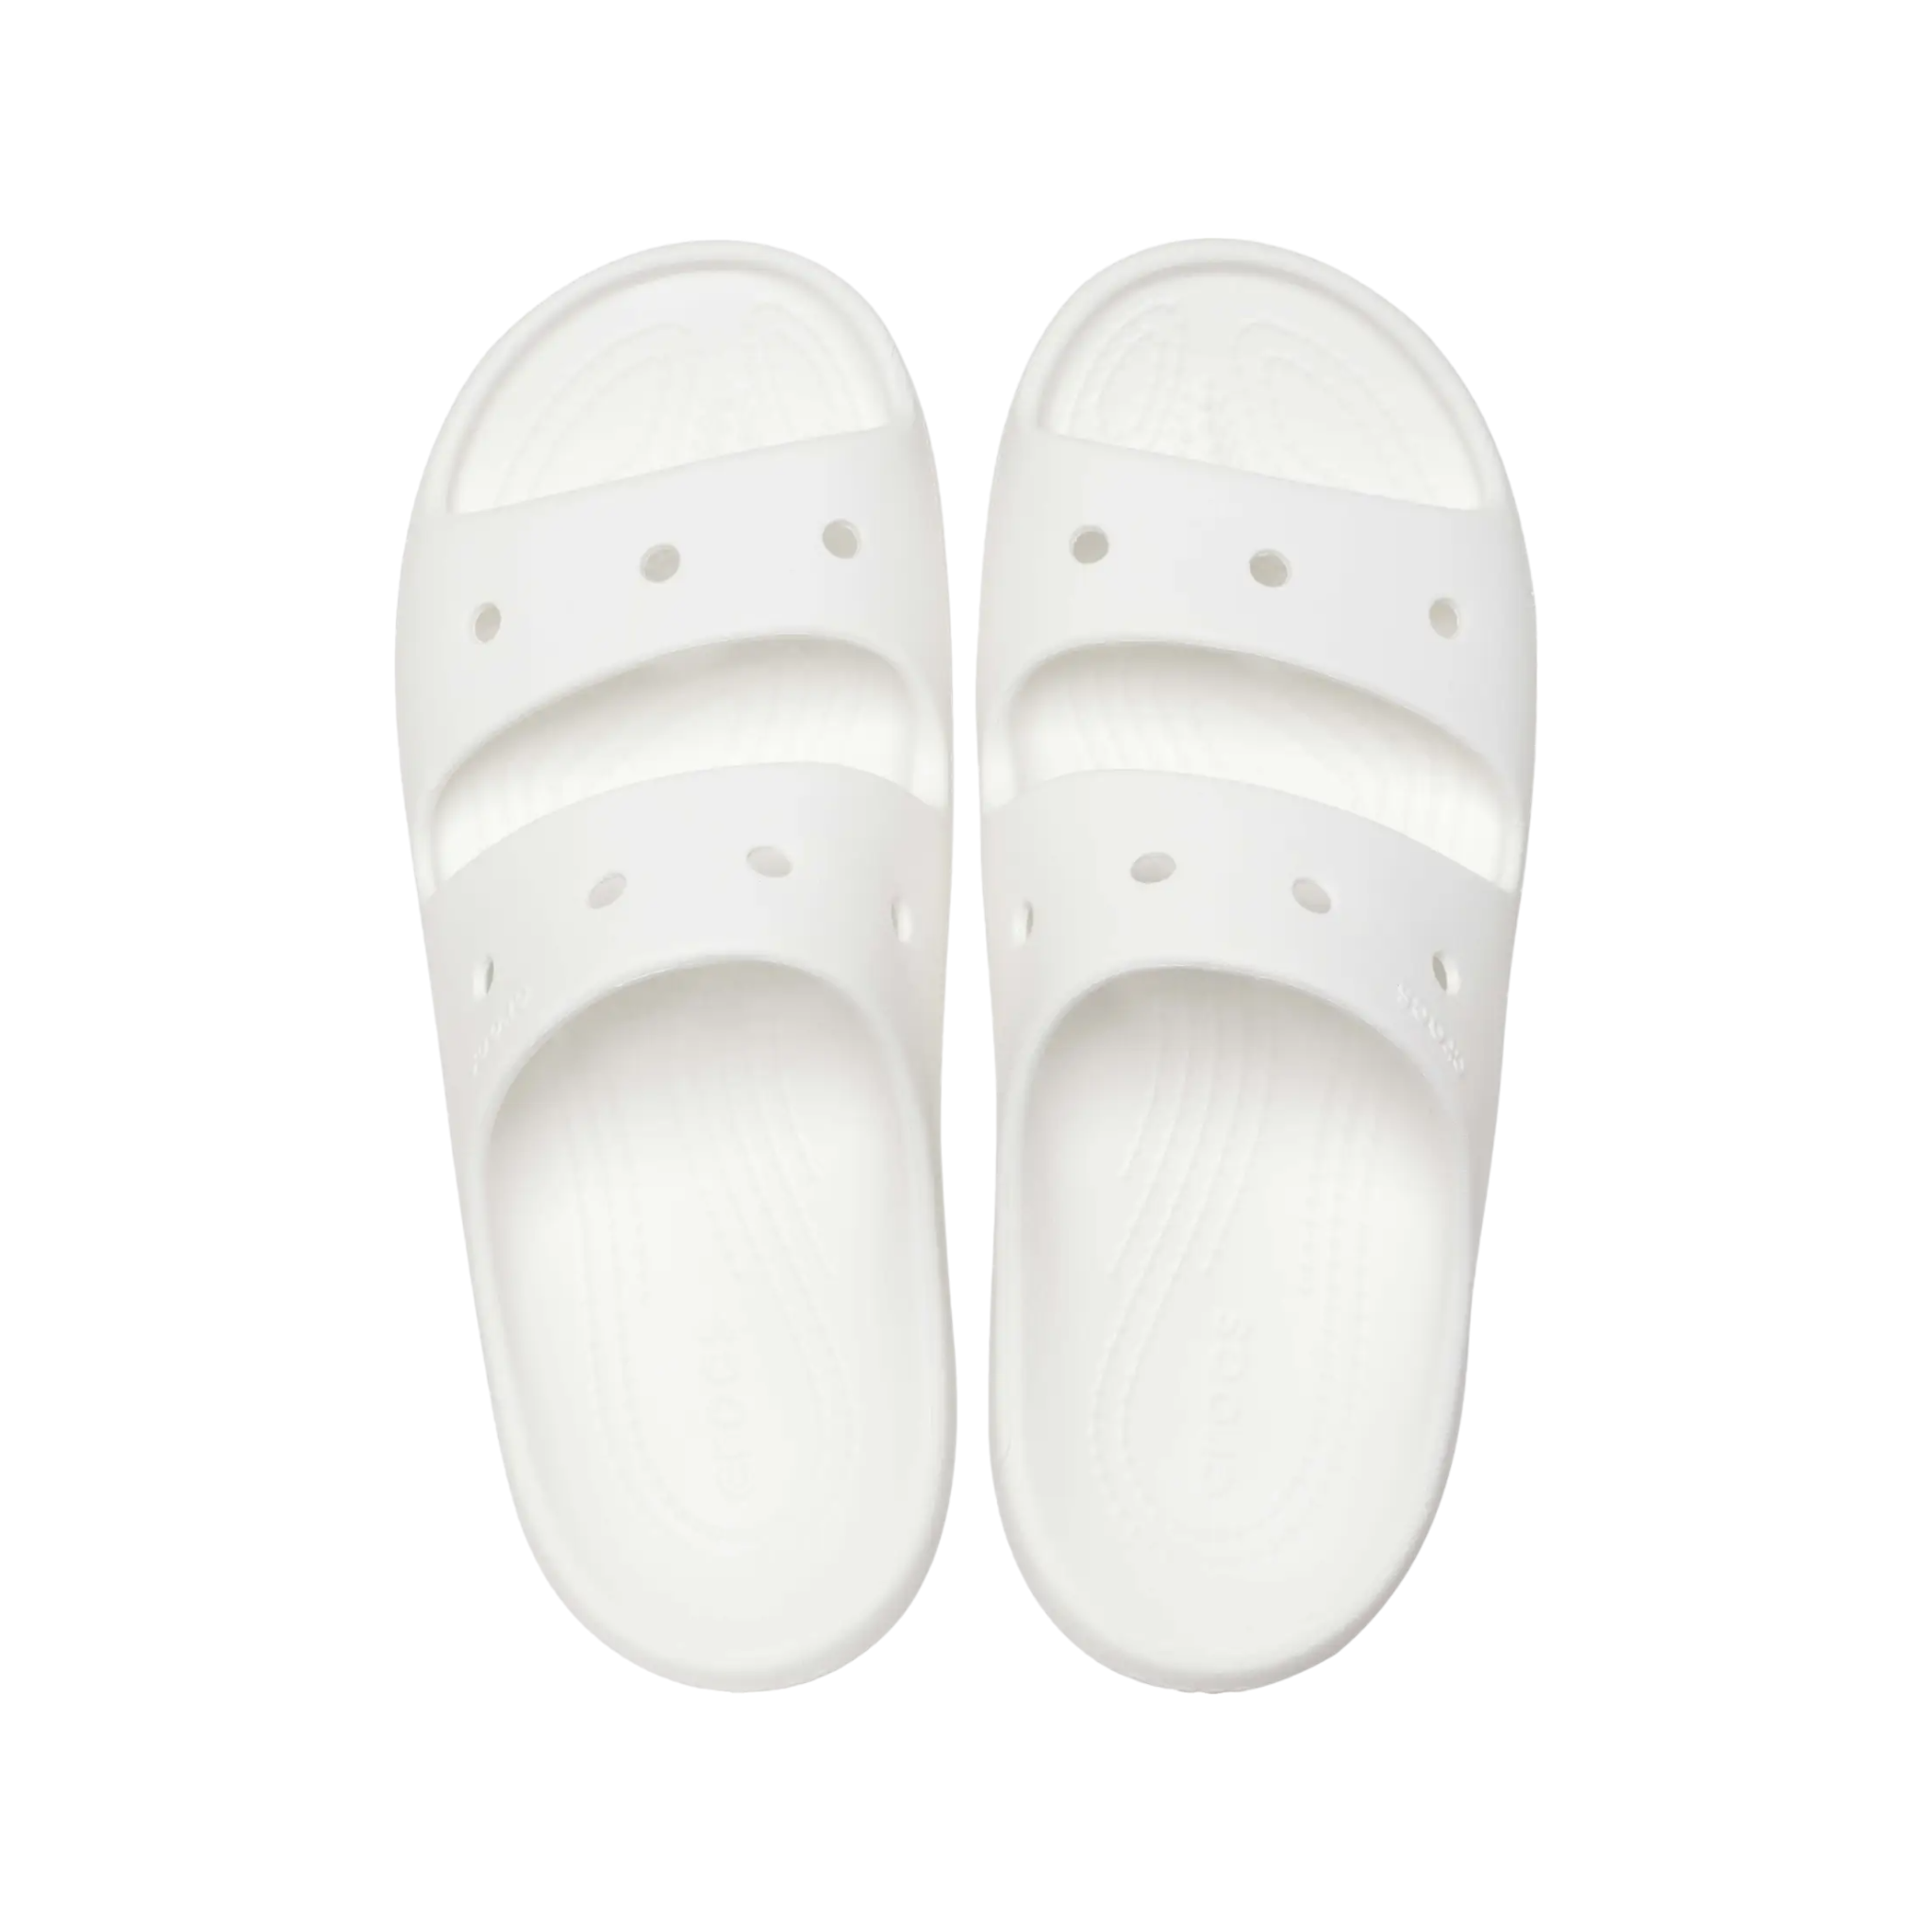 Shop Classic Sandal V2 - with shoe&amp;me - from Crocs - Sandals - Mens, Sandals, Summer, Womens - [collection]